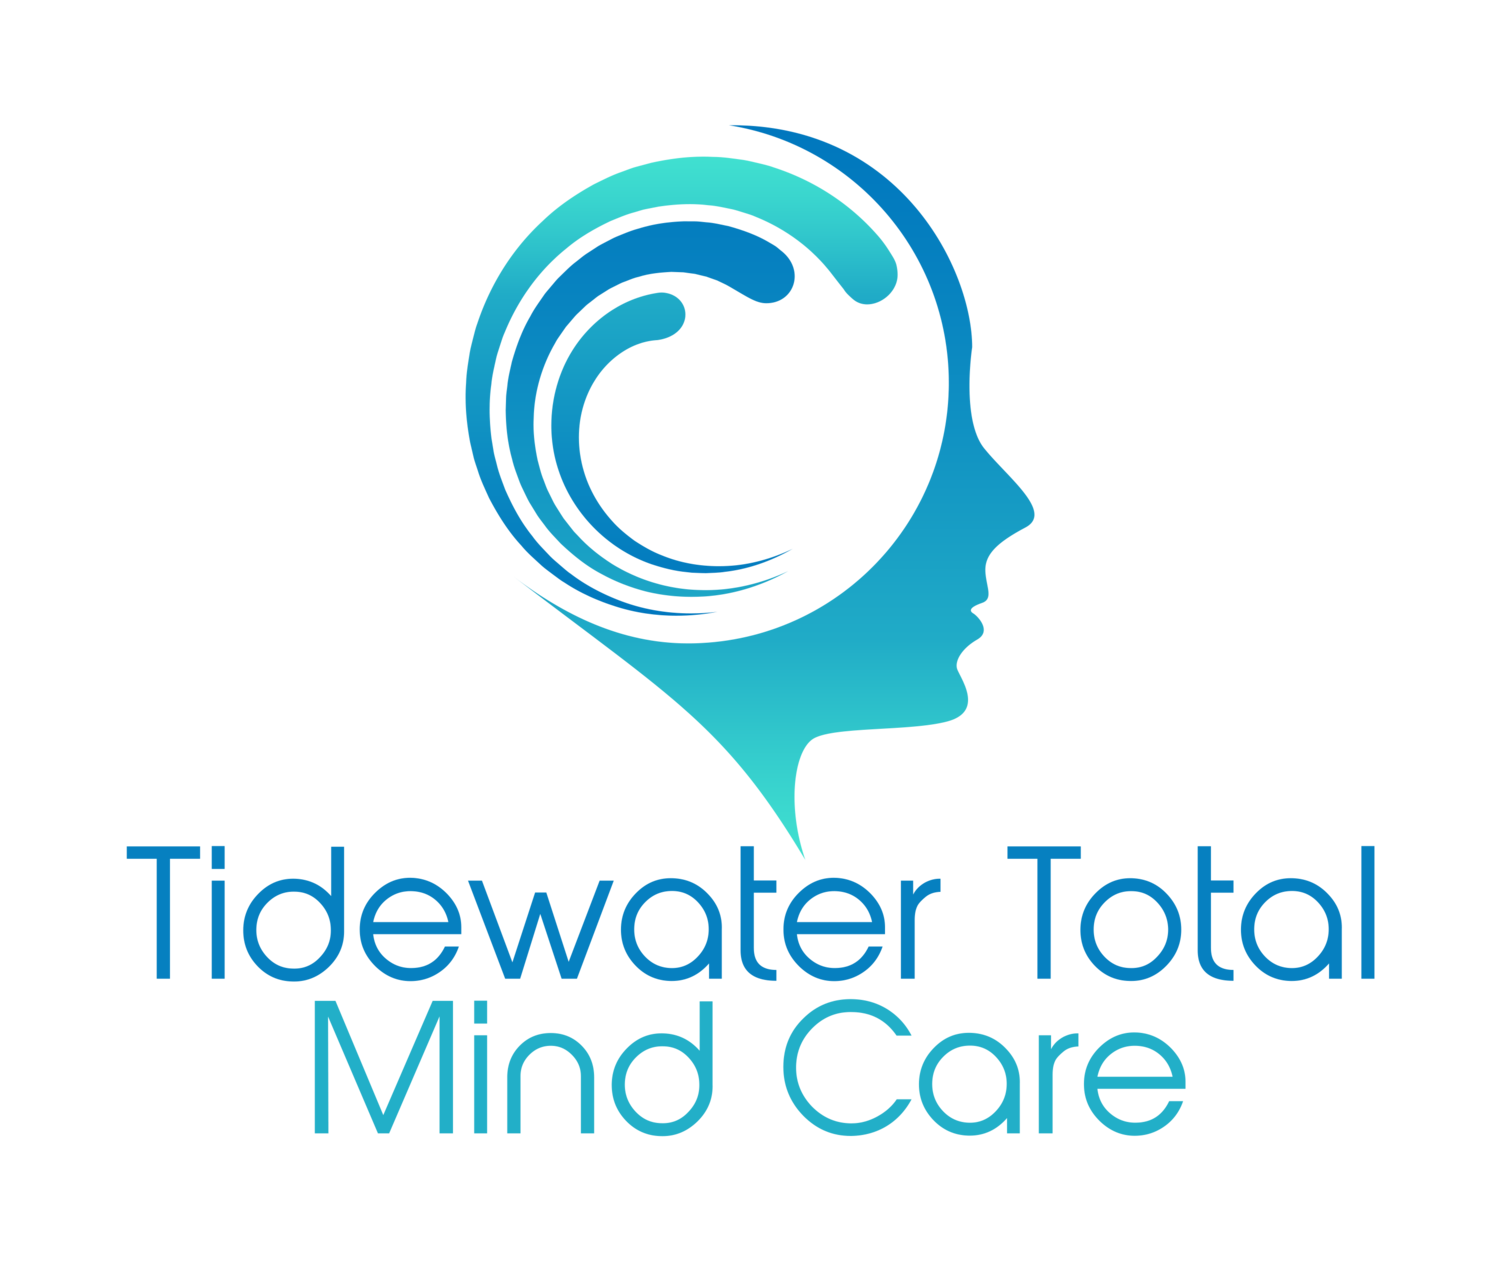 Tidewater Total Mind Care